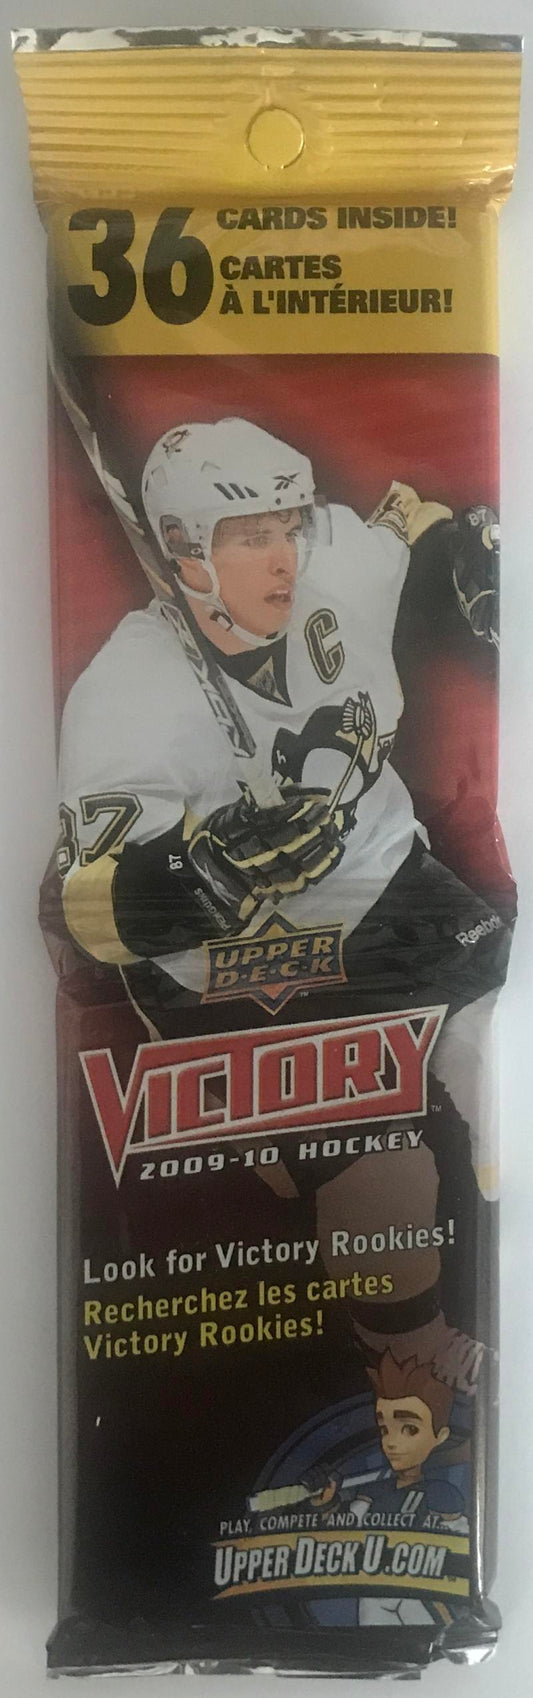 2009-10 Upper Deck Victory Fat Pack - 36 Cards Per Pack - Rookies & Inserts Image 1